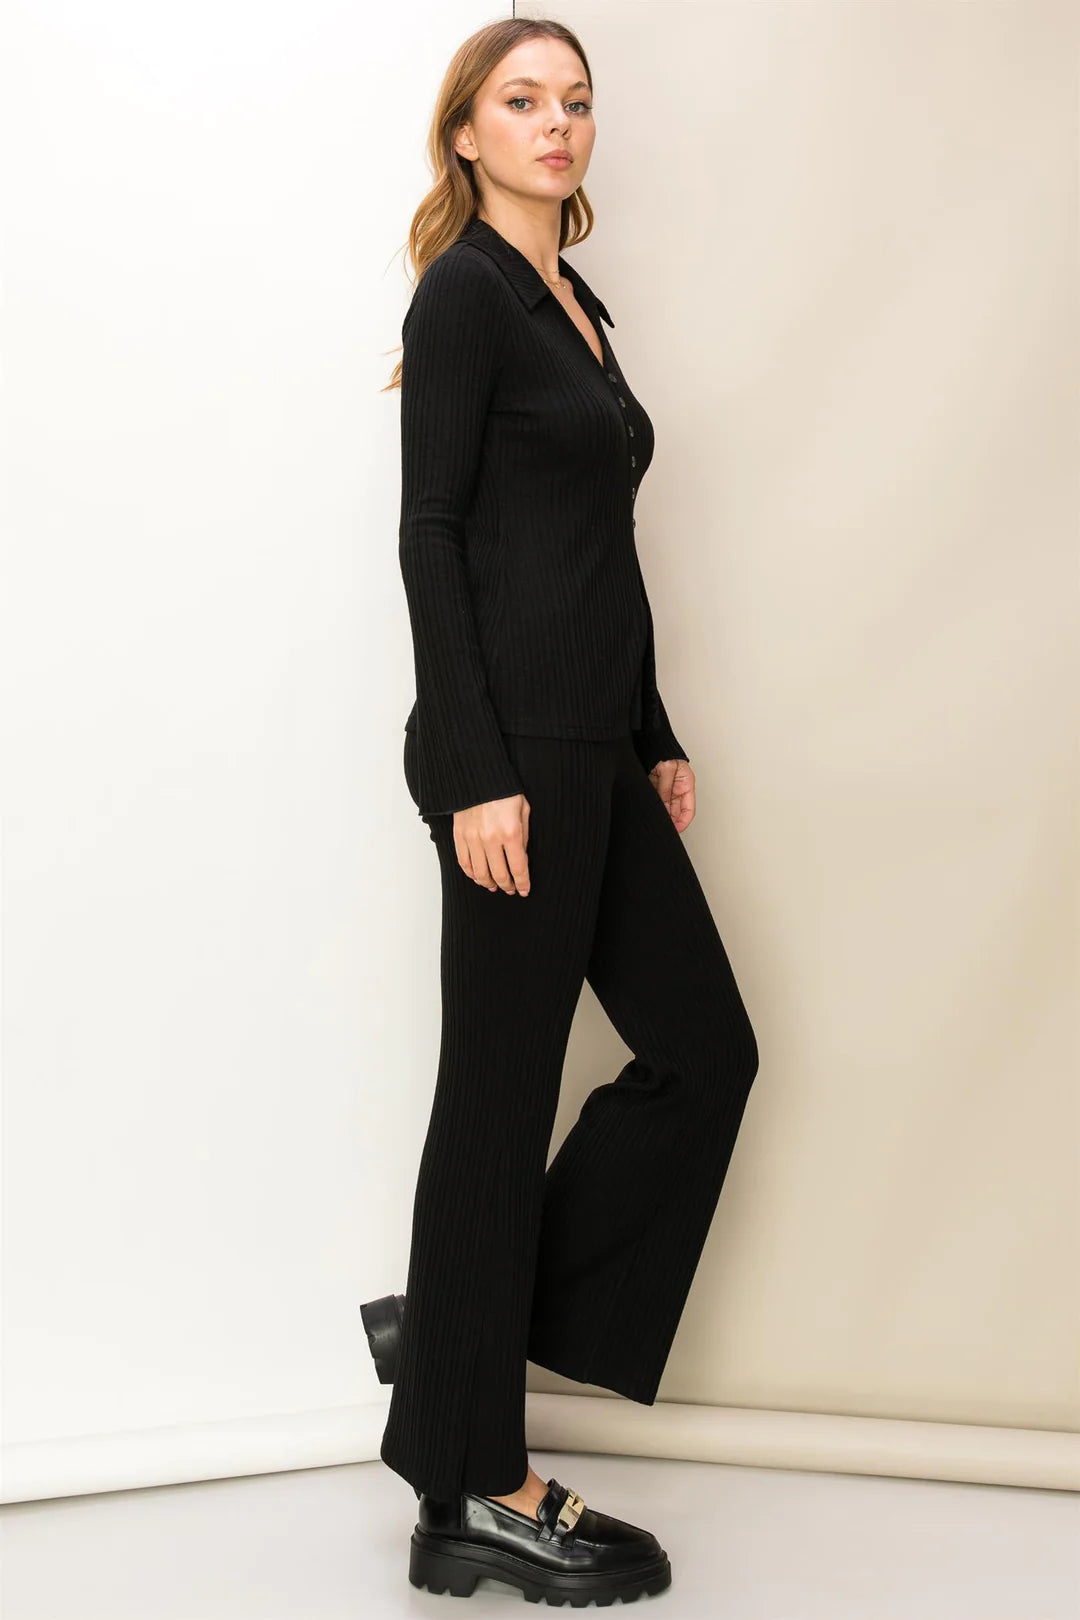 Moving On Rib Knit Top and Flare Pants Set